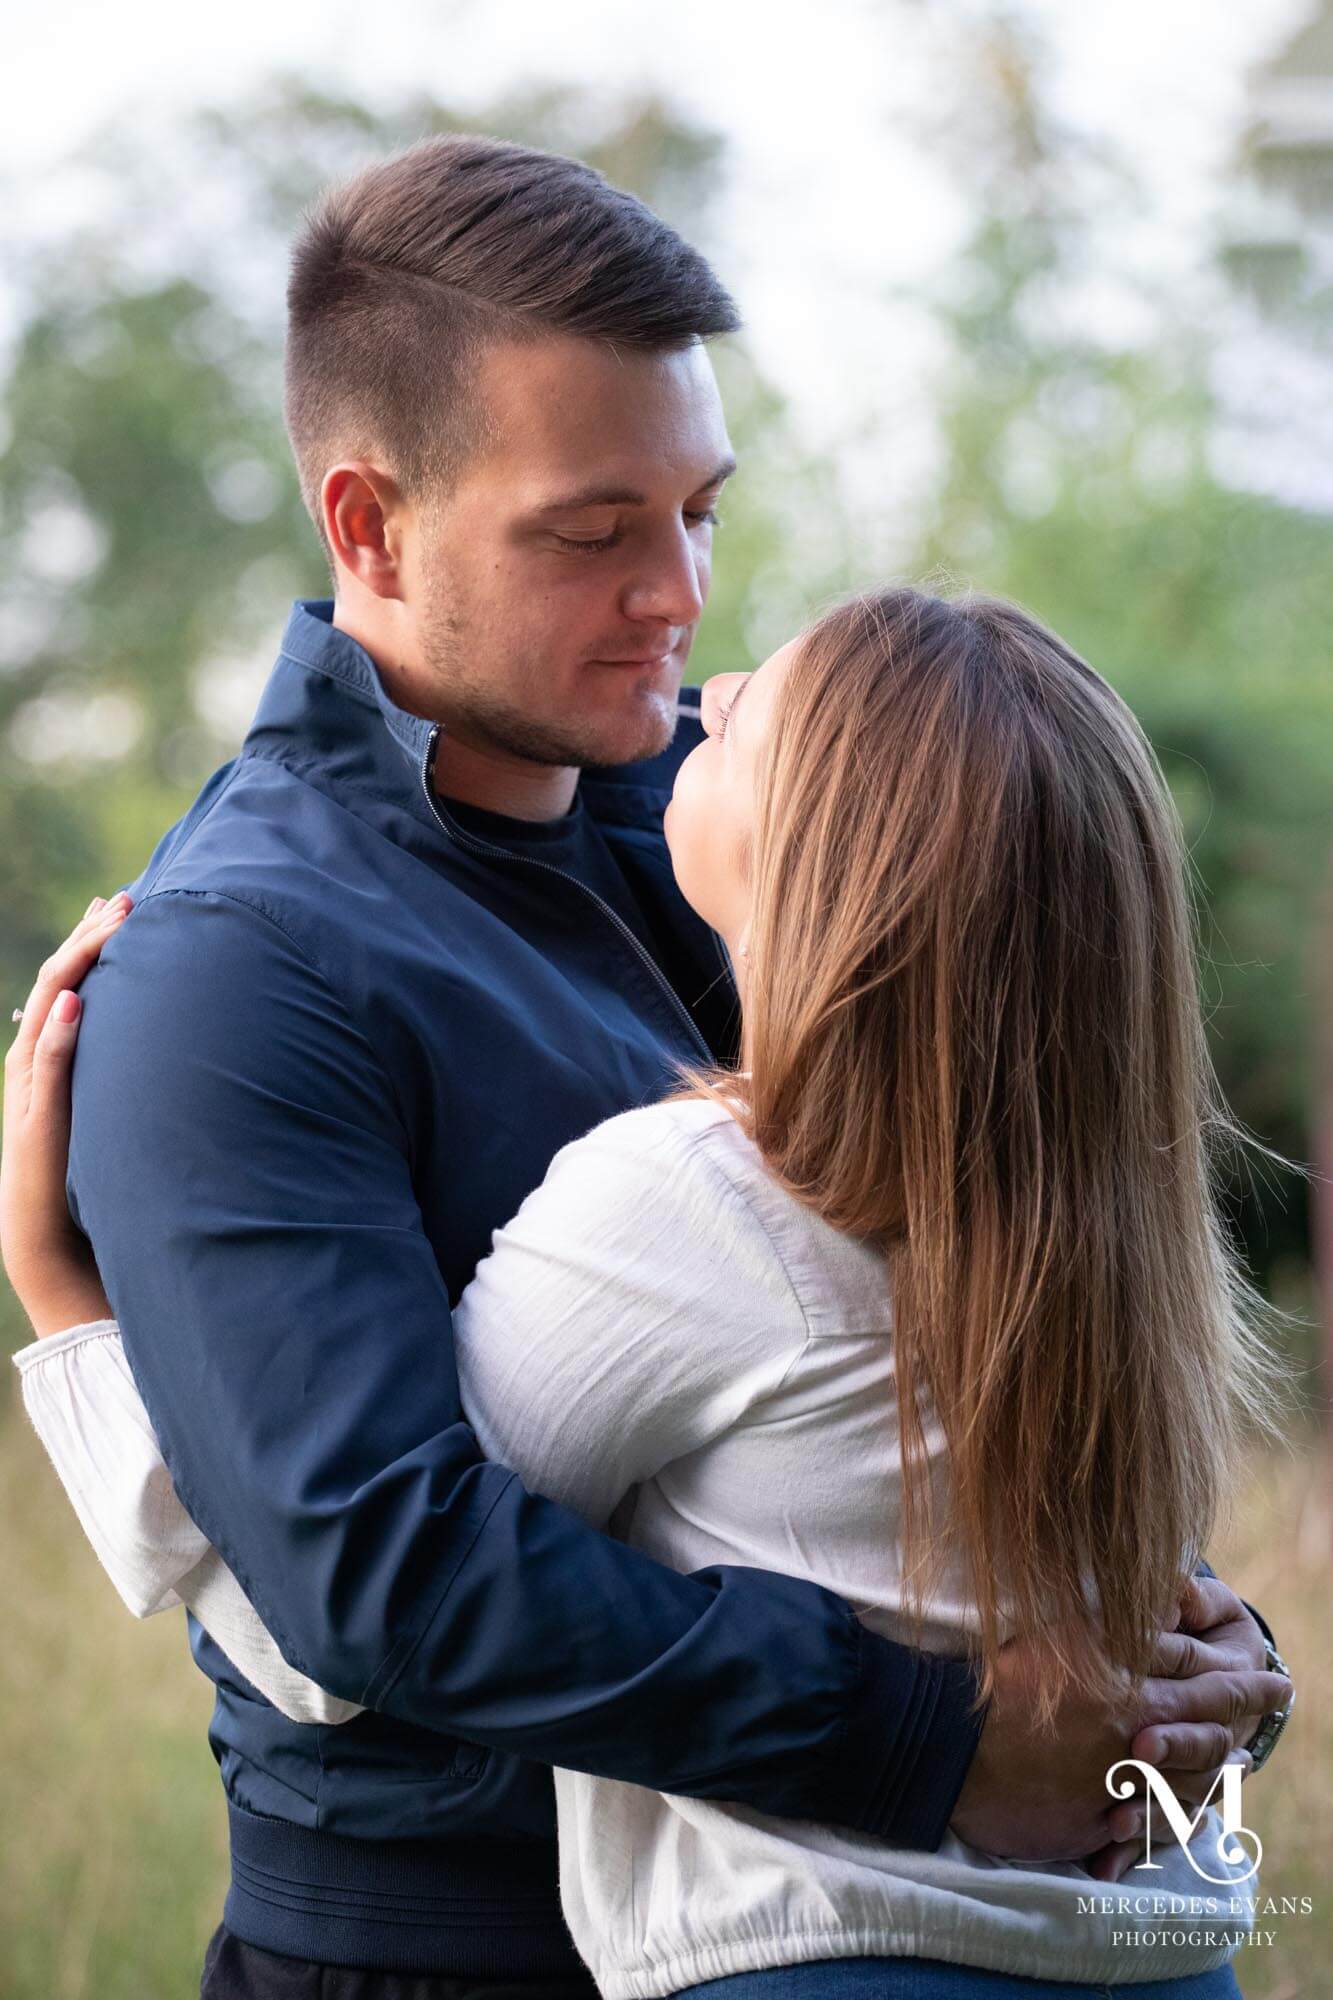 young couple embrace and look at each other in the countryside